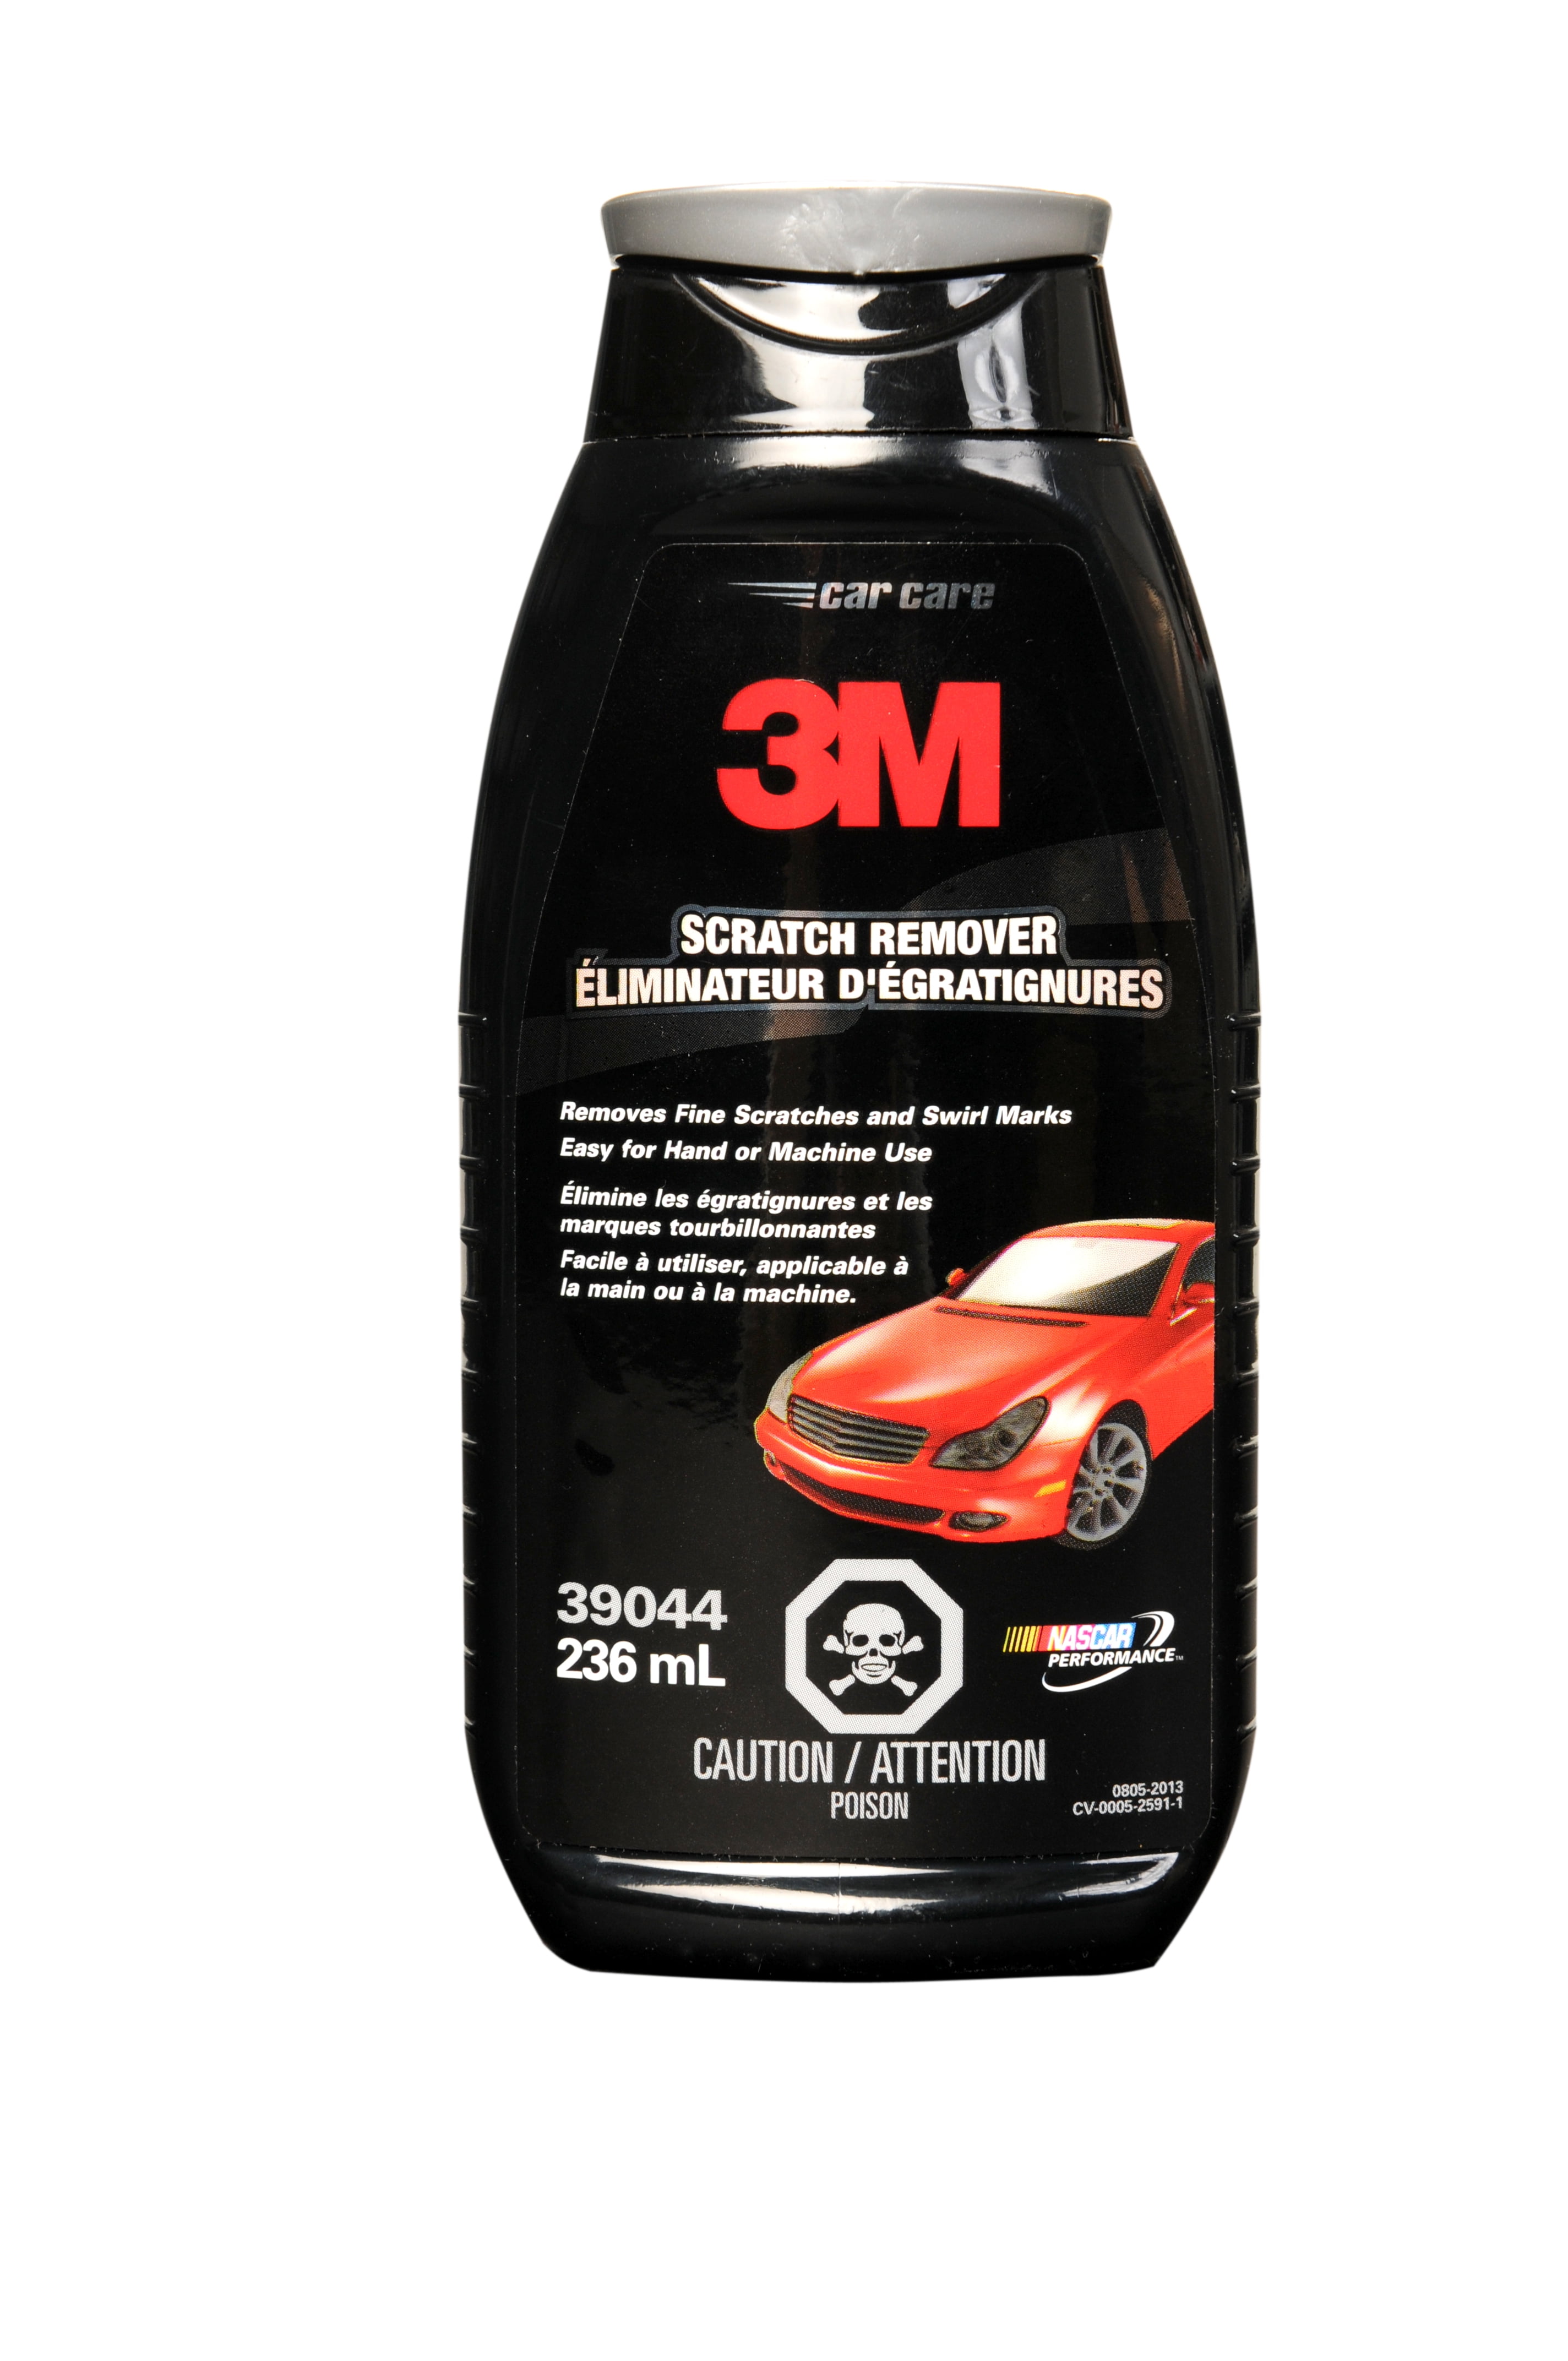 3M Scratch Remover, 39044, for cars and automotive, 8 fl oz